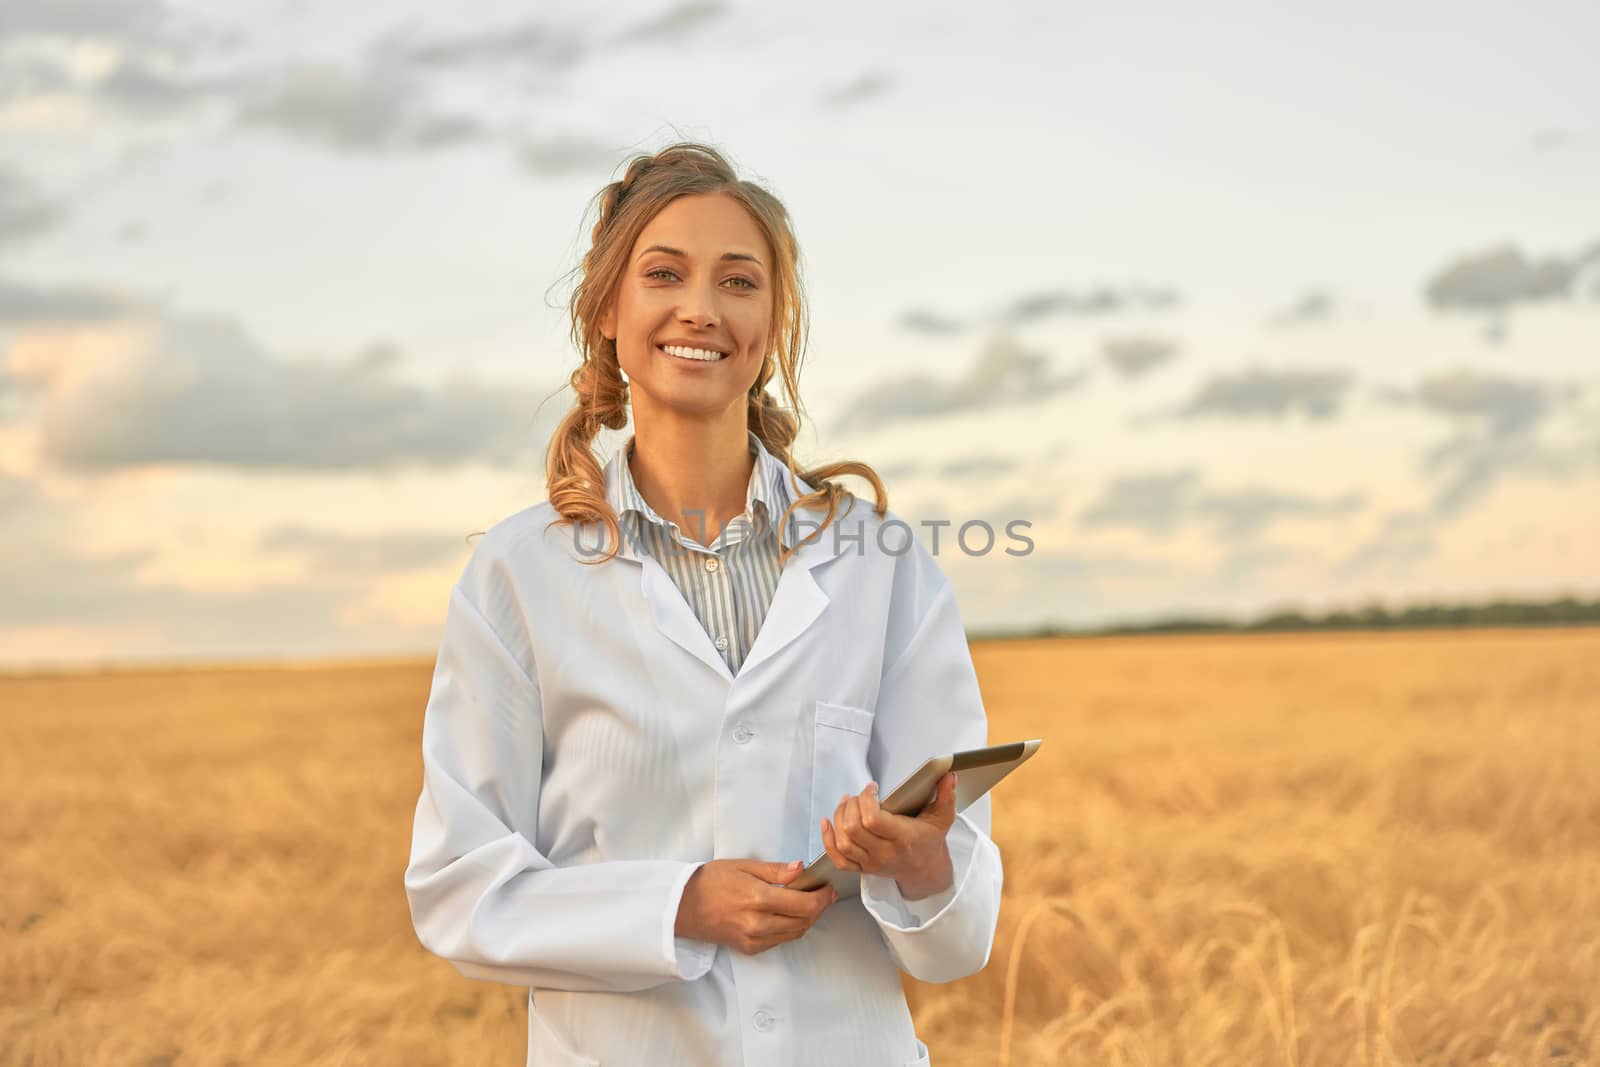 Woman farmer white coat smart farming standing farmland smiling using digital tablet Female agronomist specialist research monitoring analysis data agribusiness Caucasian worker agricultural field